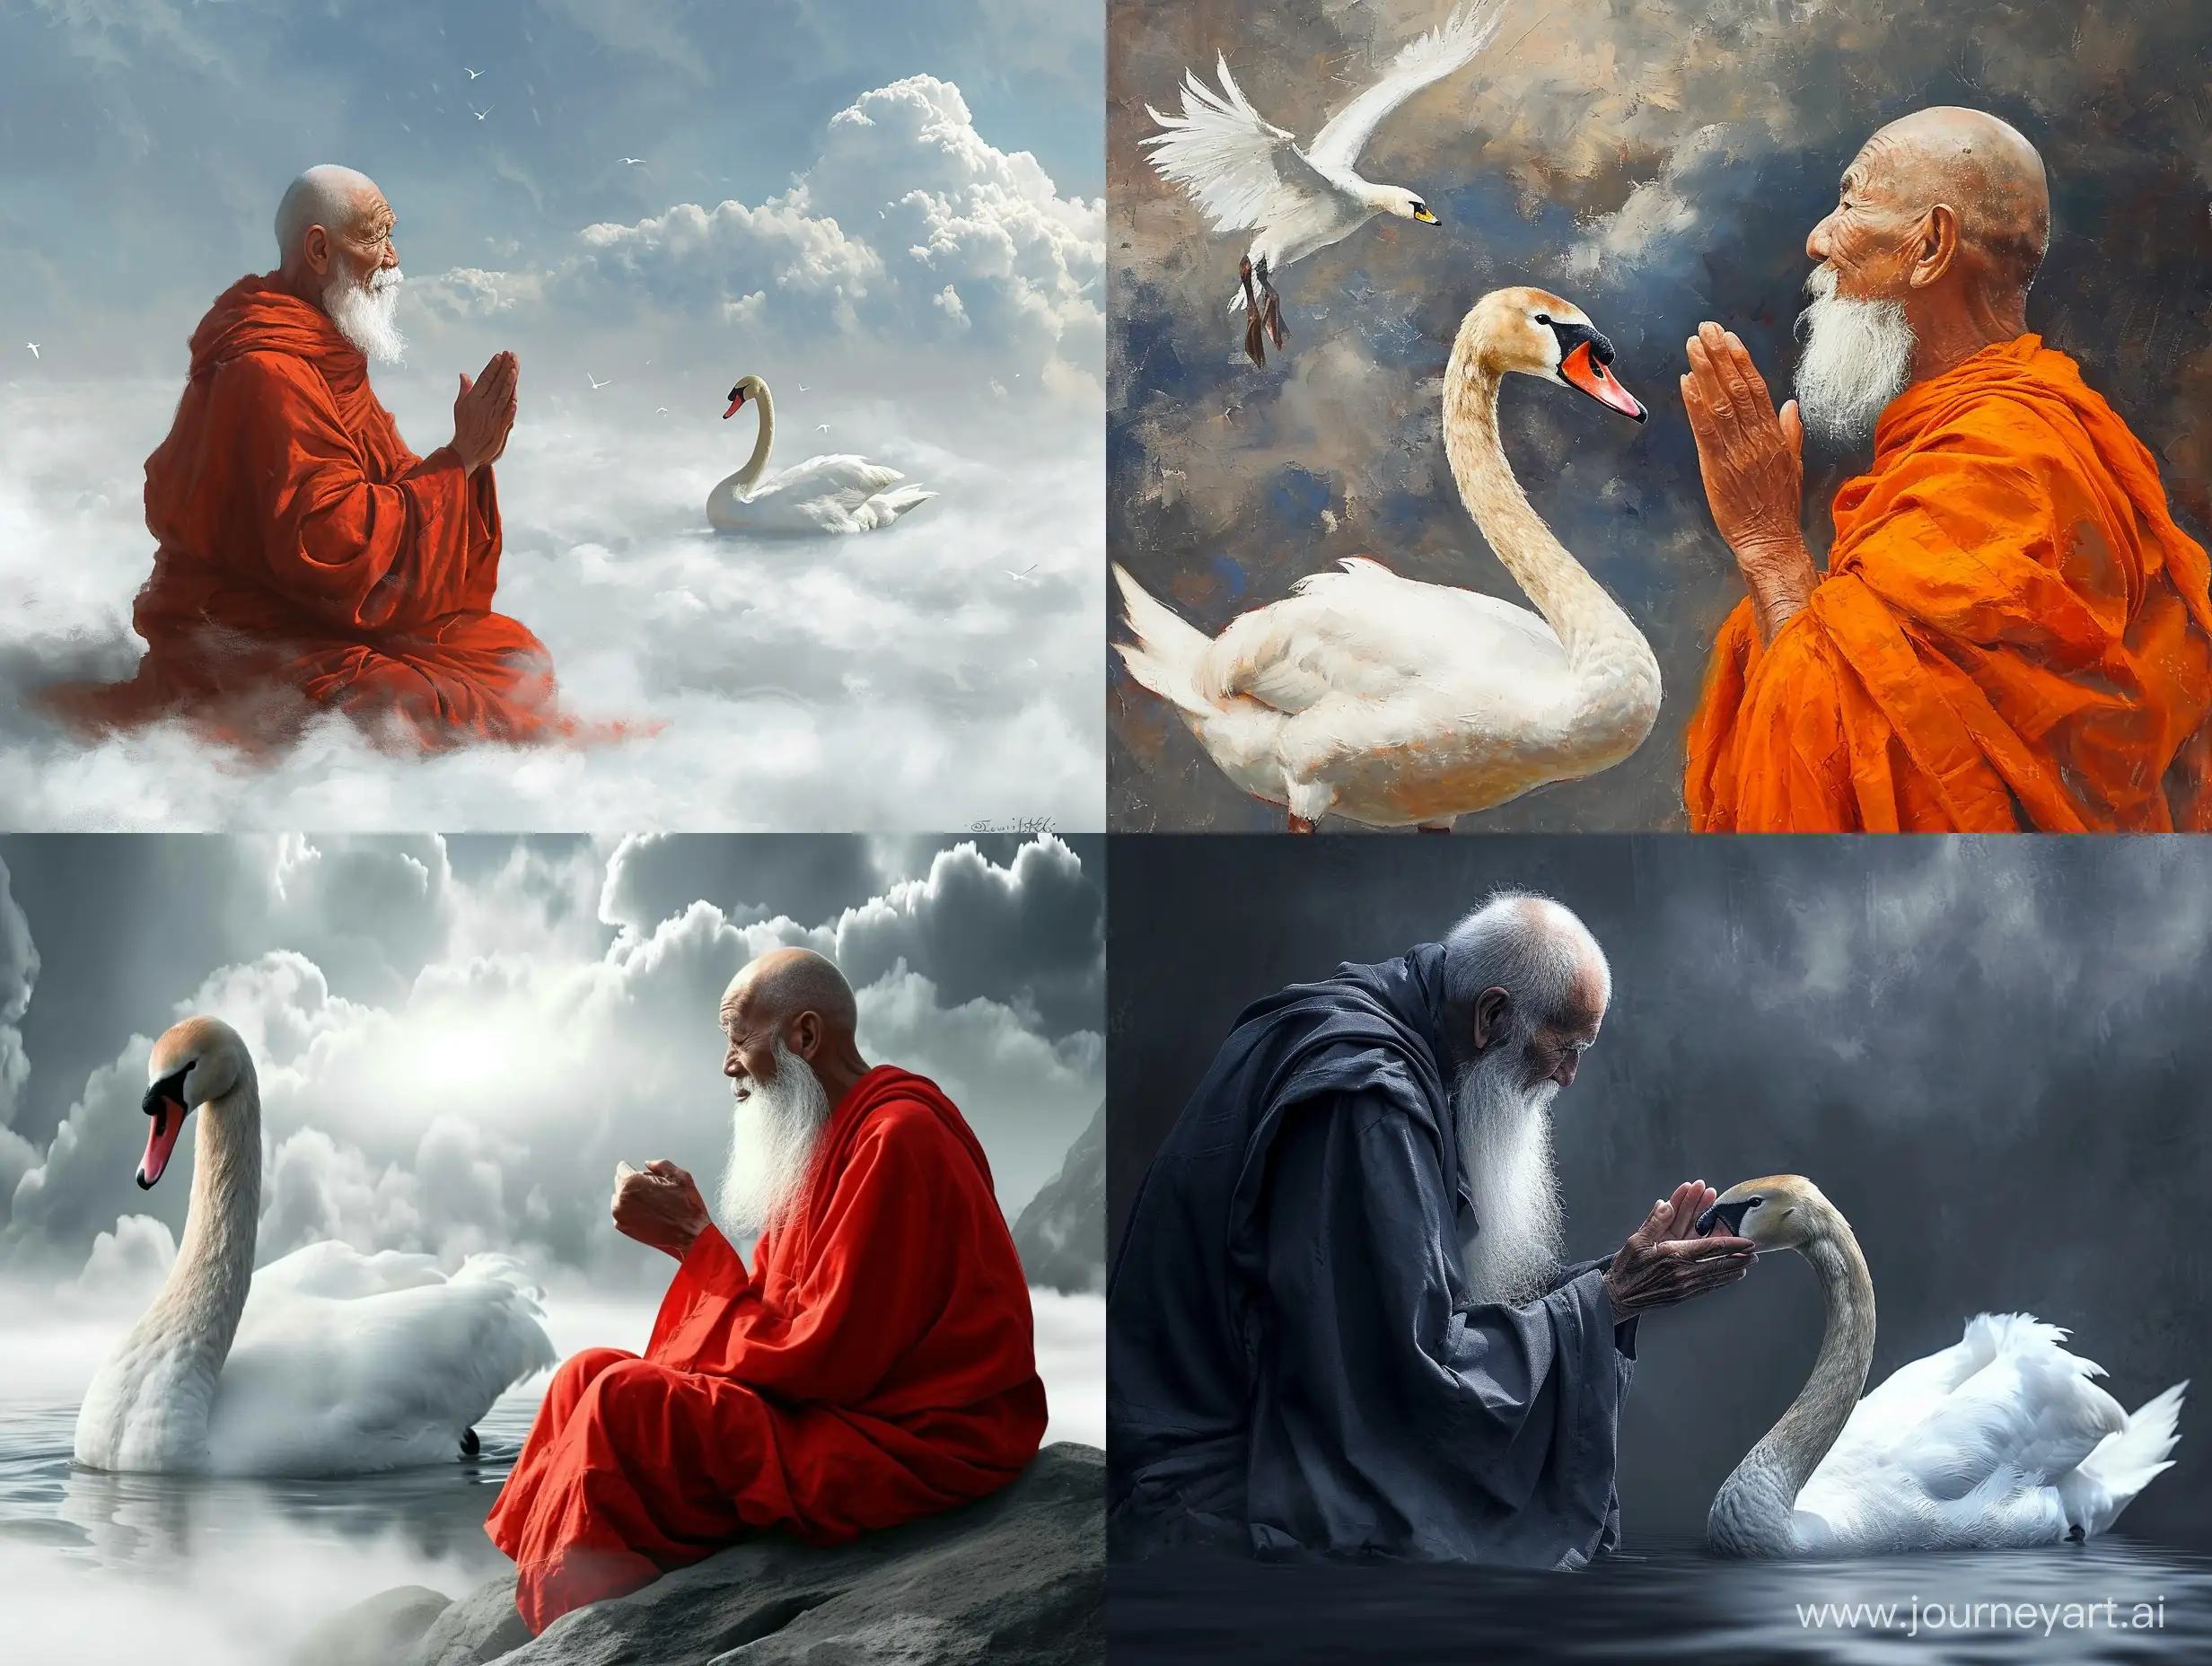 Old-Monk-Offering-a-Prayer-to-the-Sky-with-a-Swan